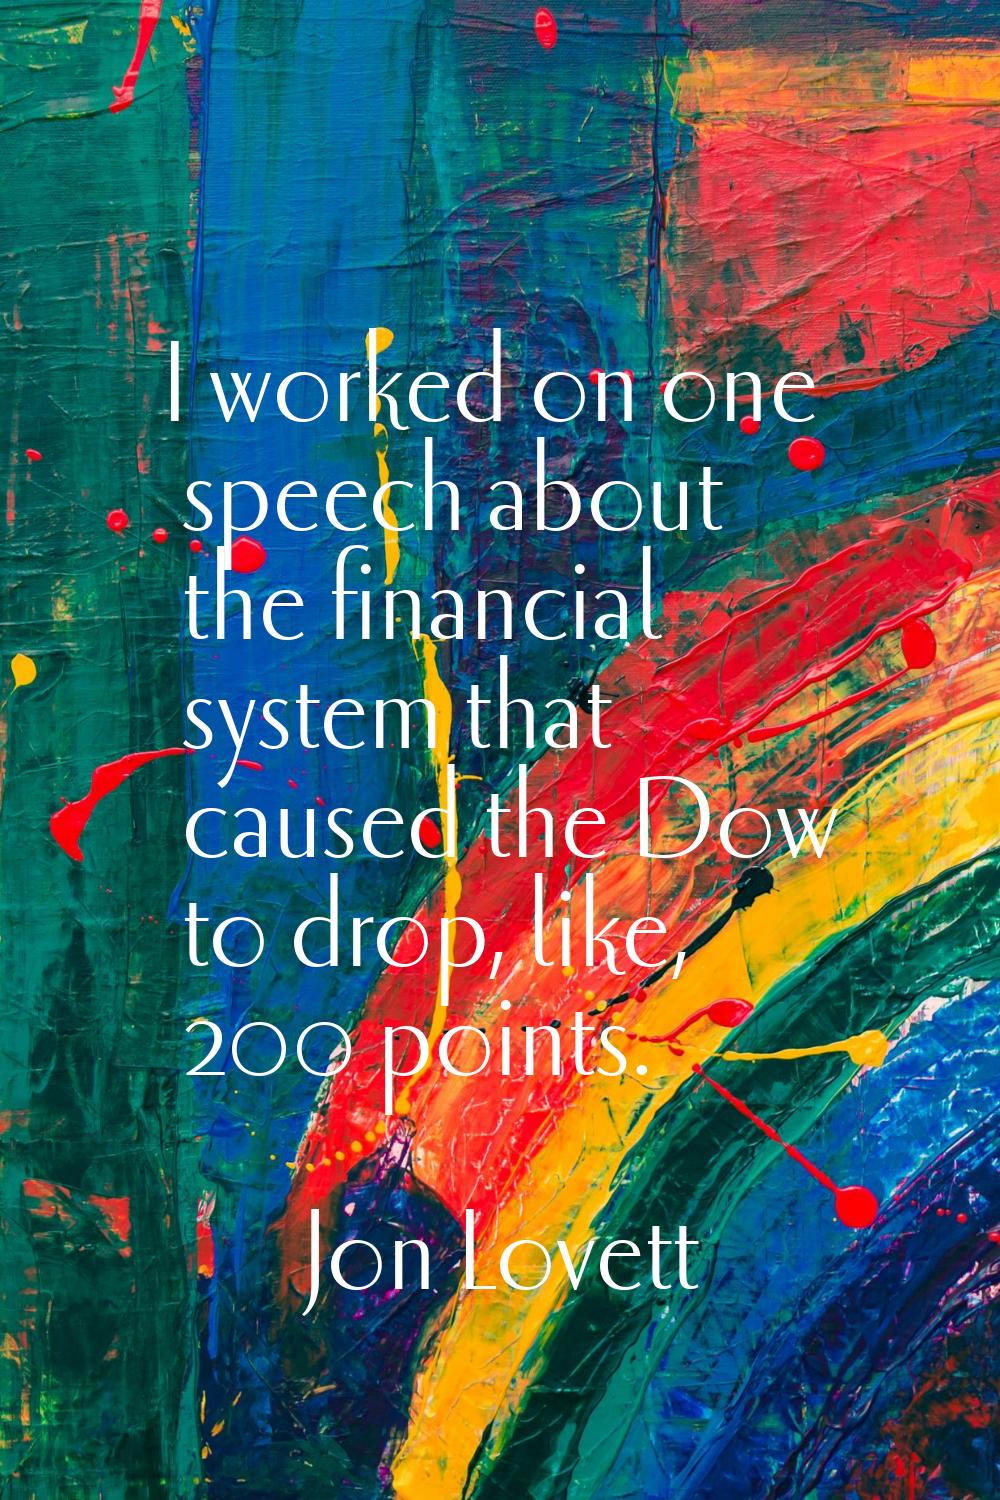 I worked on one speech about the financial system that caused the Dow to drop, like, 200 points.